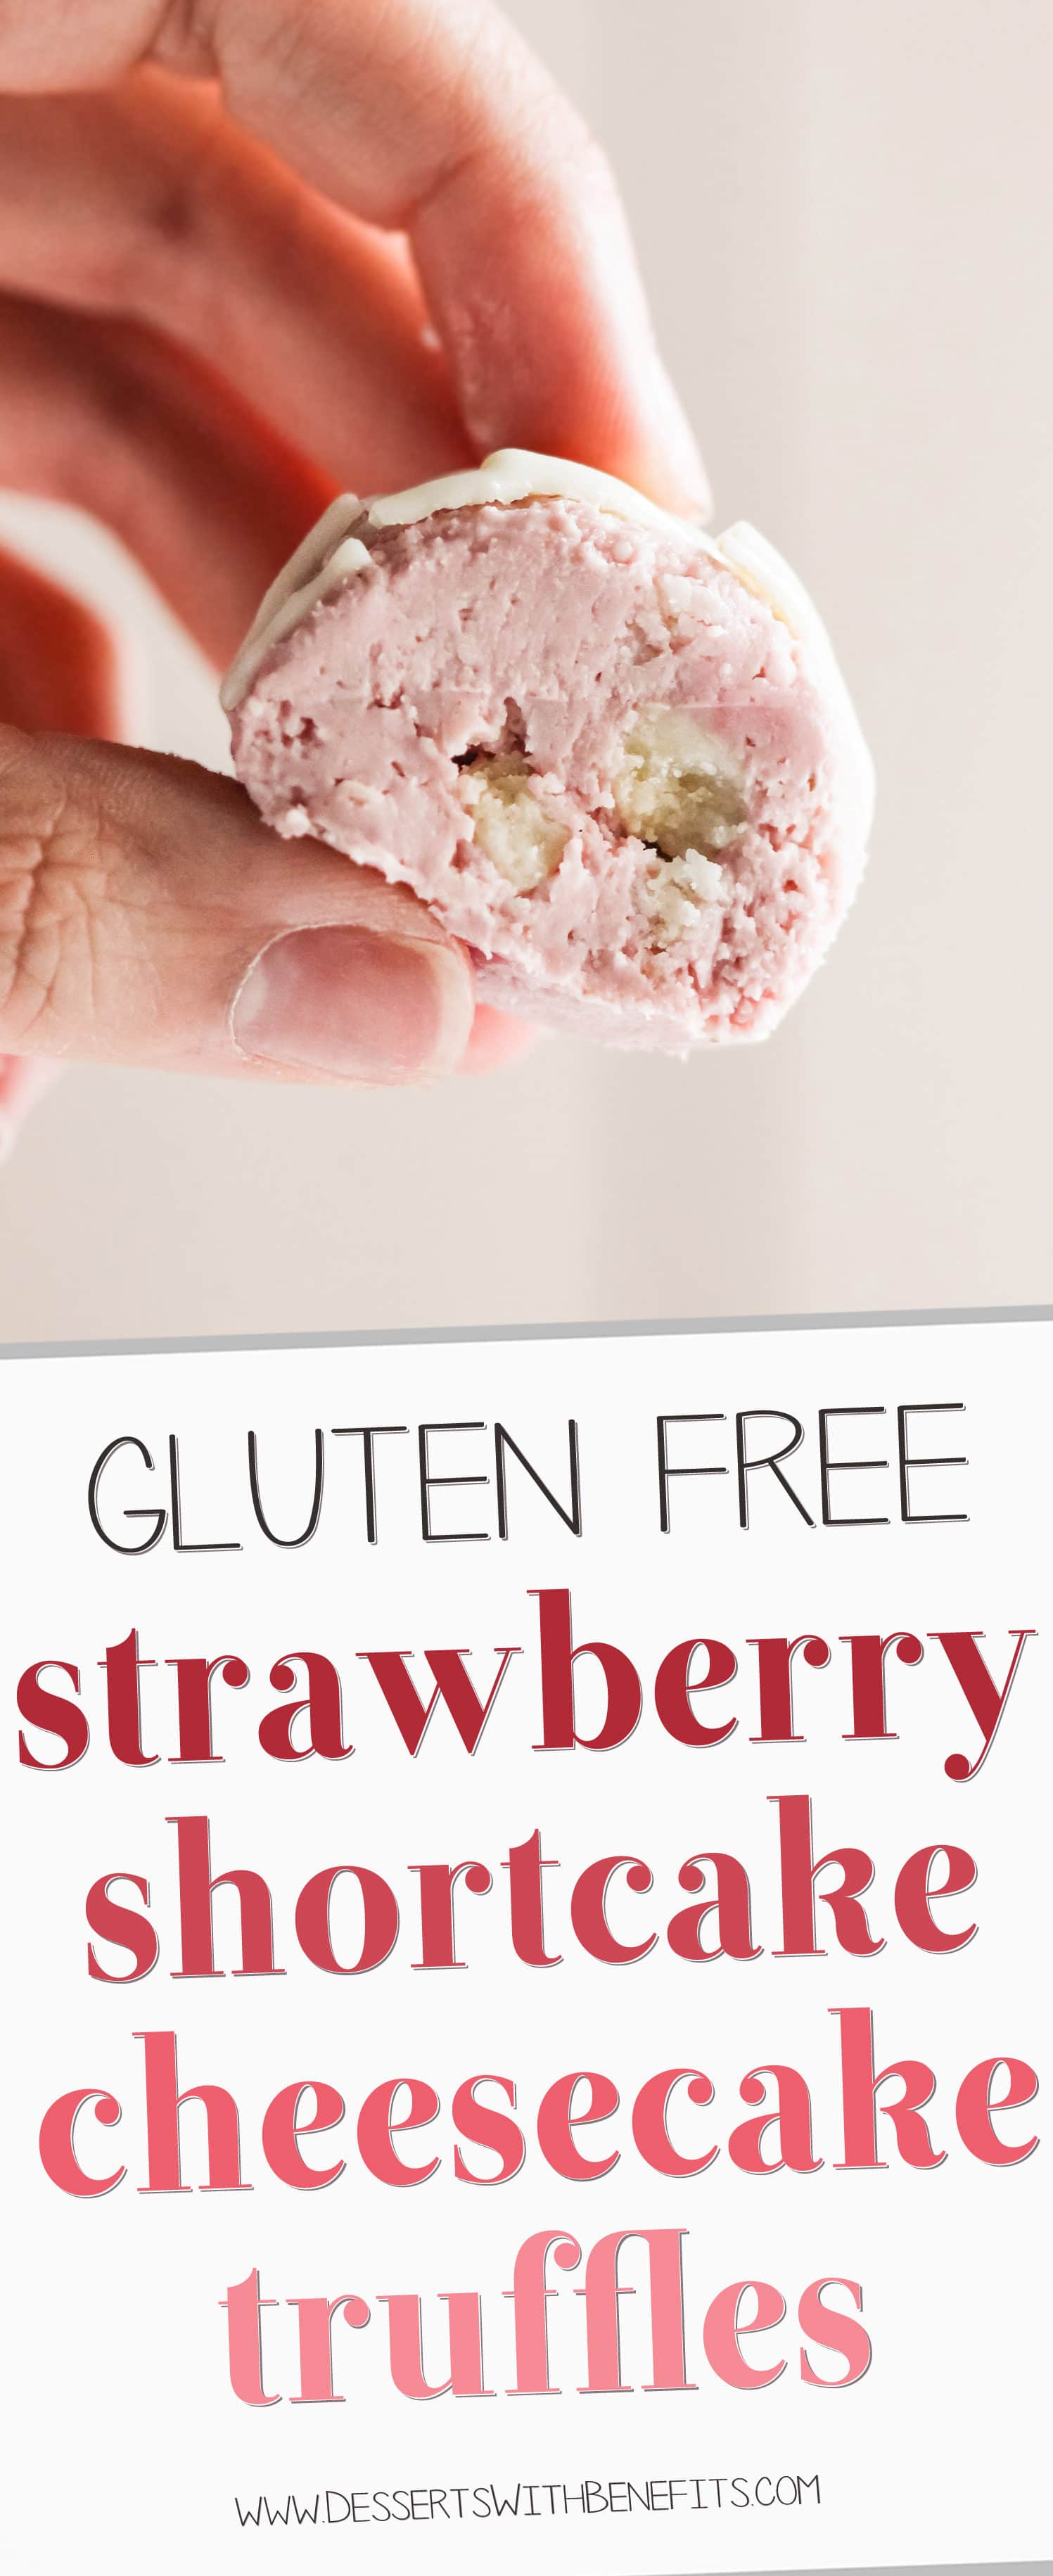 These Gluten Free Strawberry Shortcake Cheesecake Truffles are made with real strawberry cheesecake and sugar cookies chunks, and are coated in rich and delicious white chocolate.  If you're looking for a guilt-free bite-sized treat, you've found it! Healthy Dessert Recipes at the Desserts With Benefits Blog